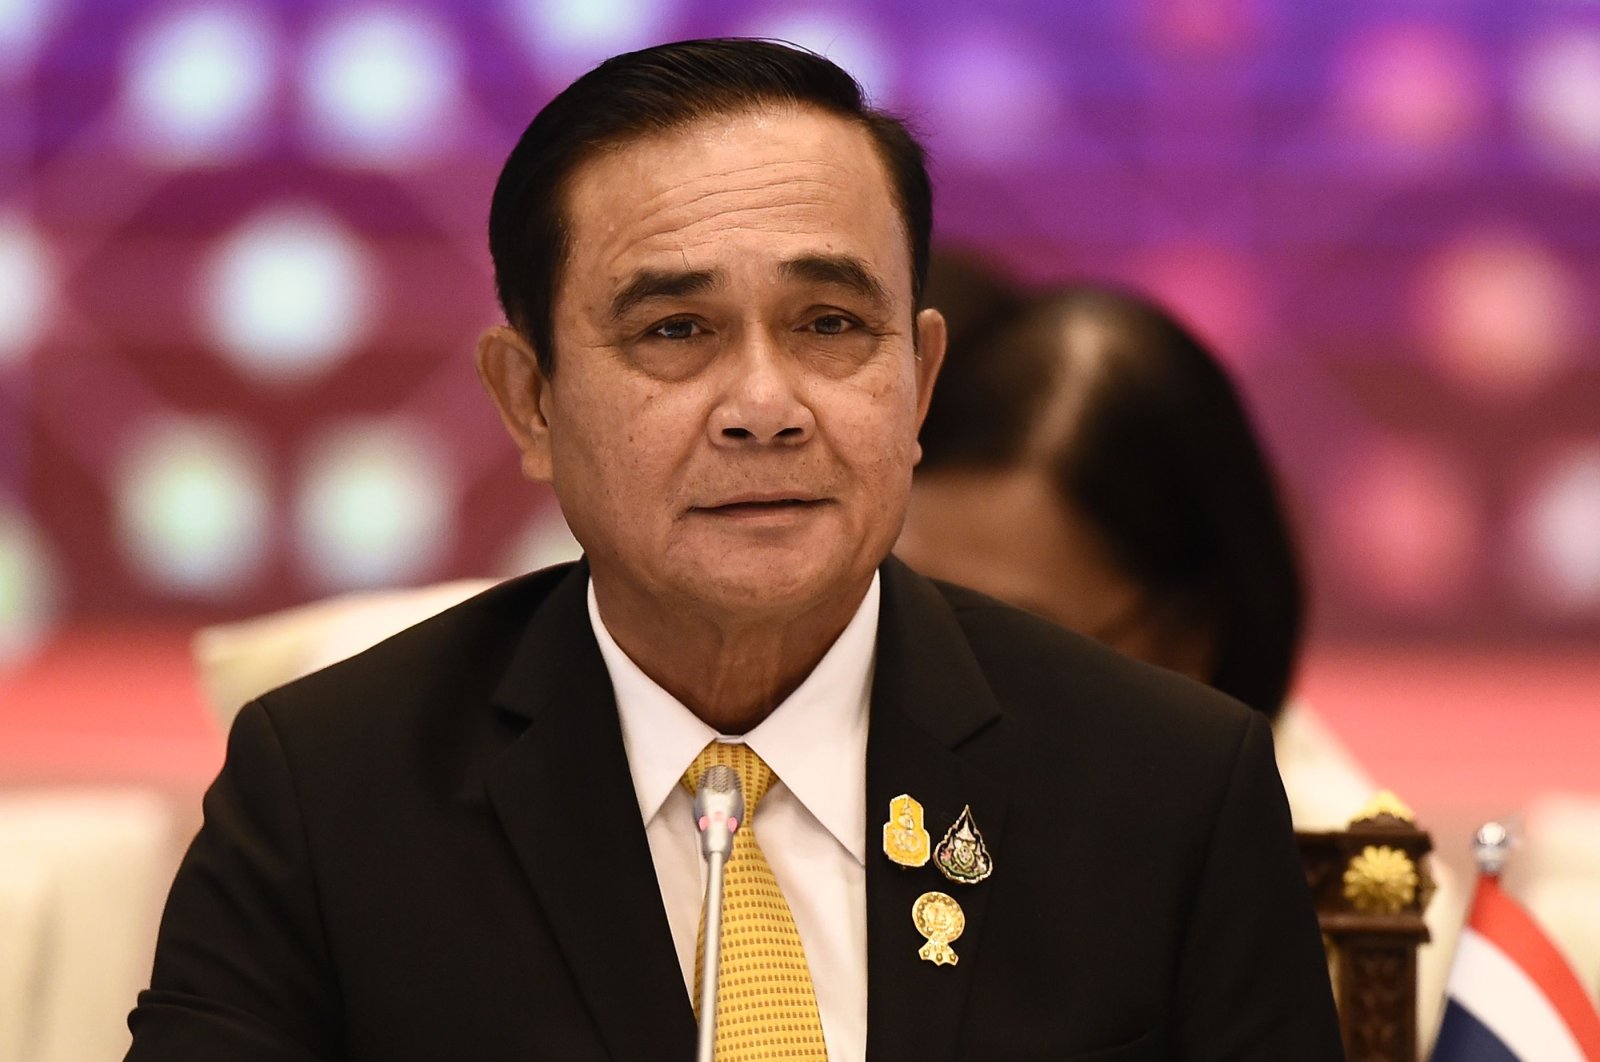 Thailand's Prime Minister Prayut Chan-O-Cha attends the plenary session of the 34th Association of Southeast Asian Nations (ASEAN) Summit in Bangkok, Thailand, June 22, 2019. (AFP Photo)